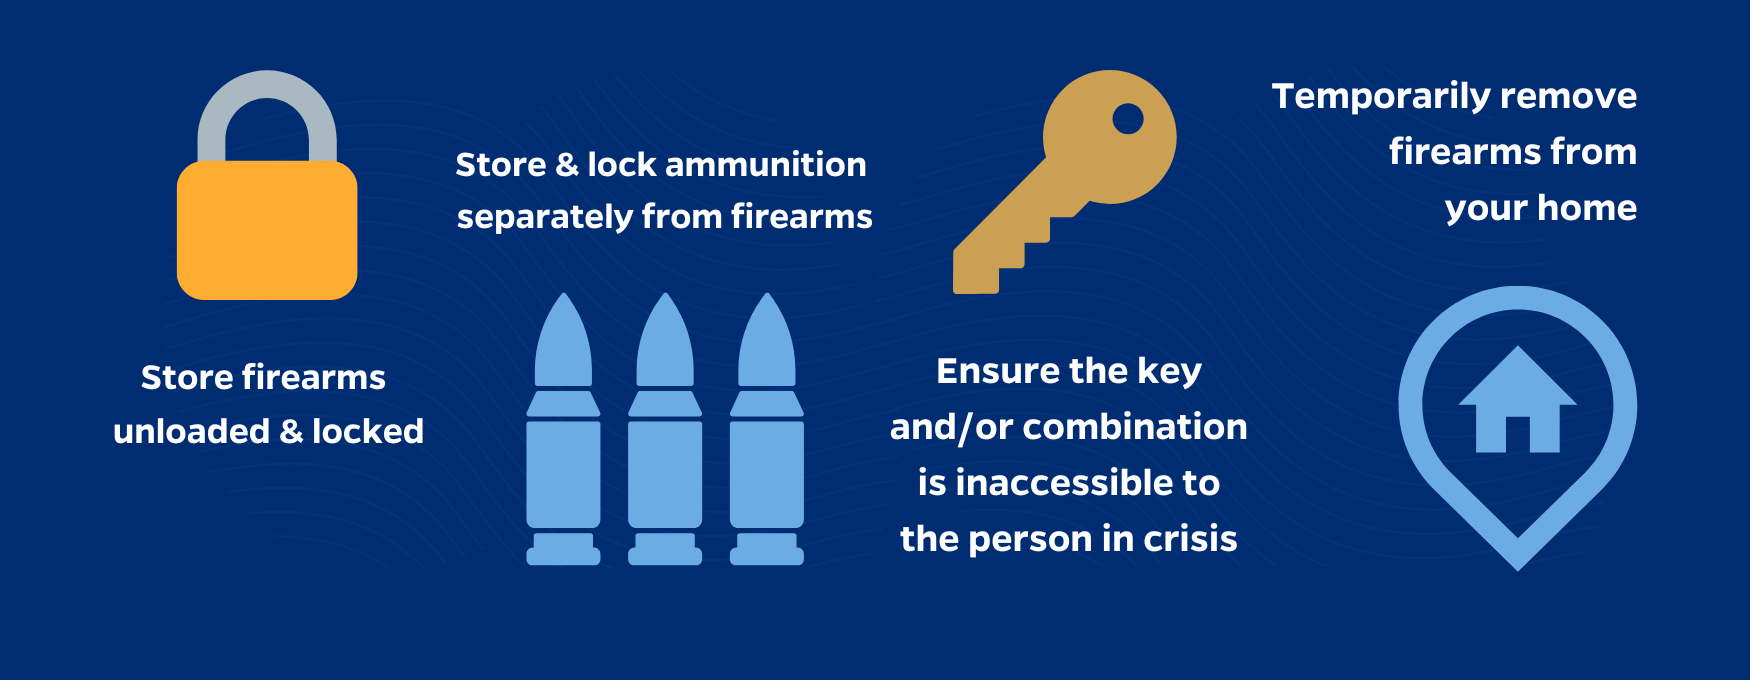 Image of lock, ammunition, key and home with text: Store firearms unloaded and locked, store and lock ammunition separately from firearms, ensure the key and/or combination is inaccessible to the person in crisis, temorarirly remove firearms from your home